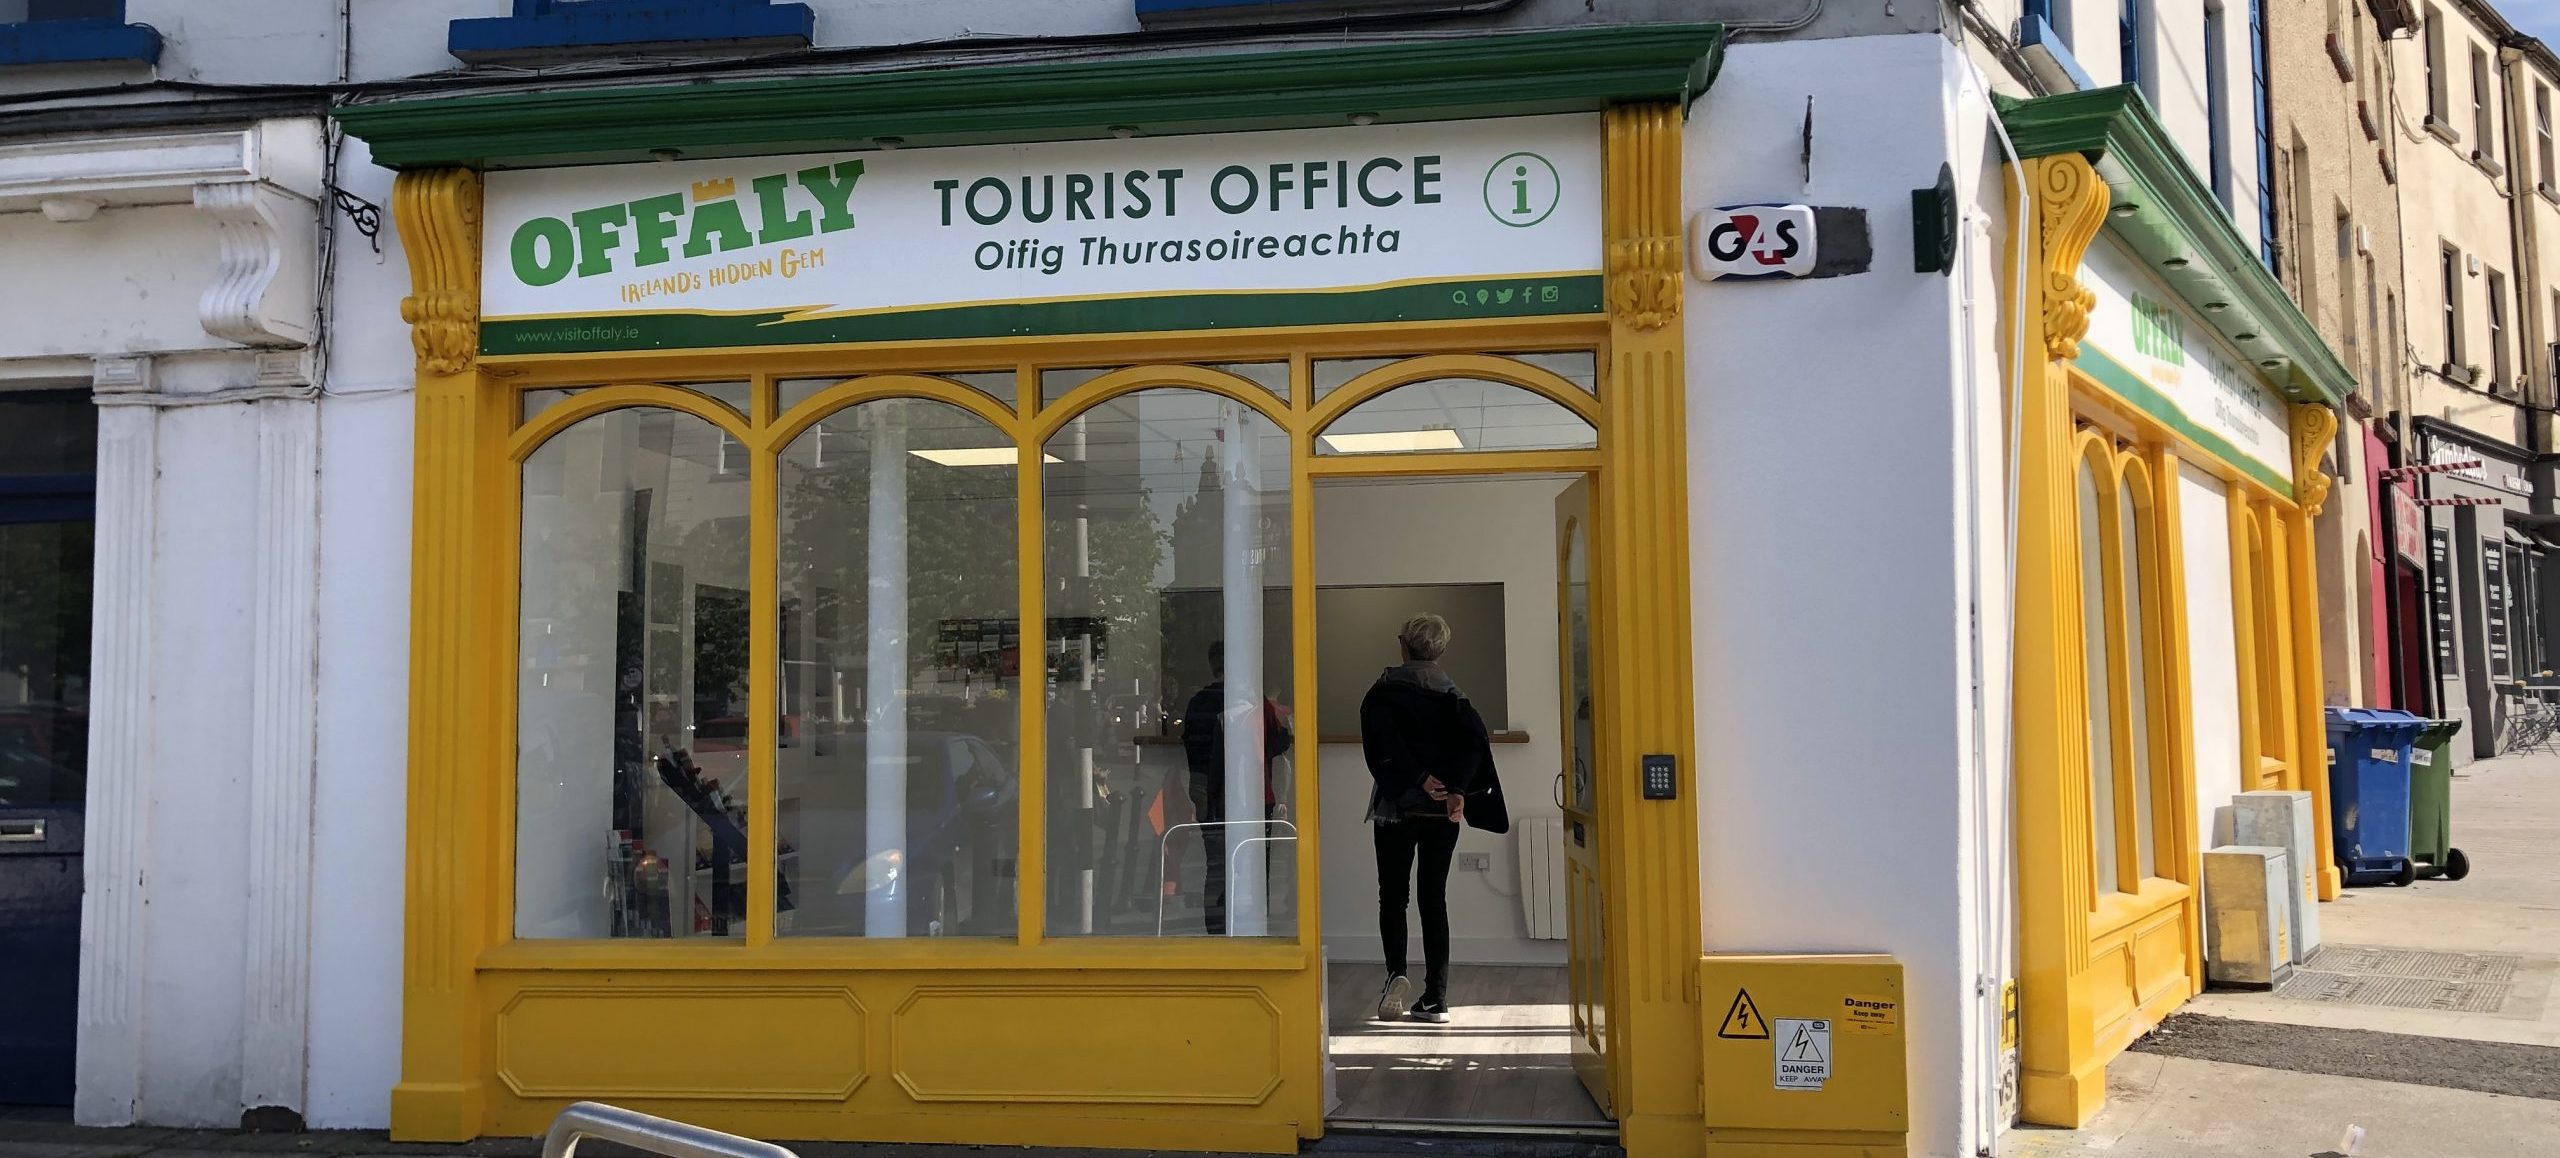 local tourist office definition